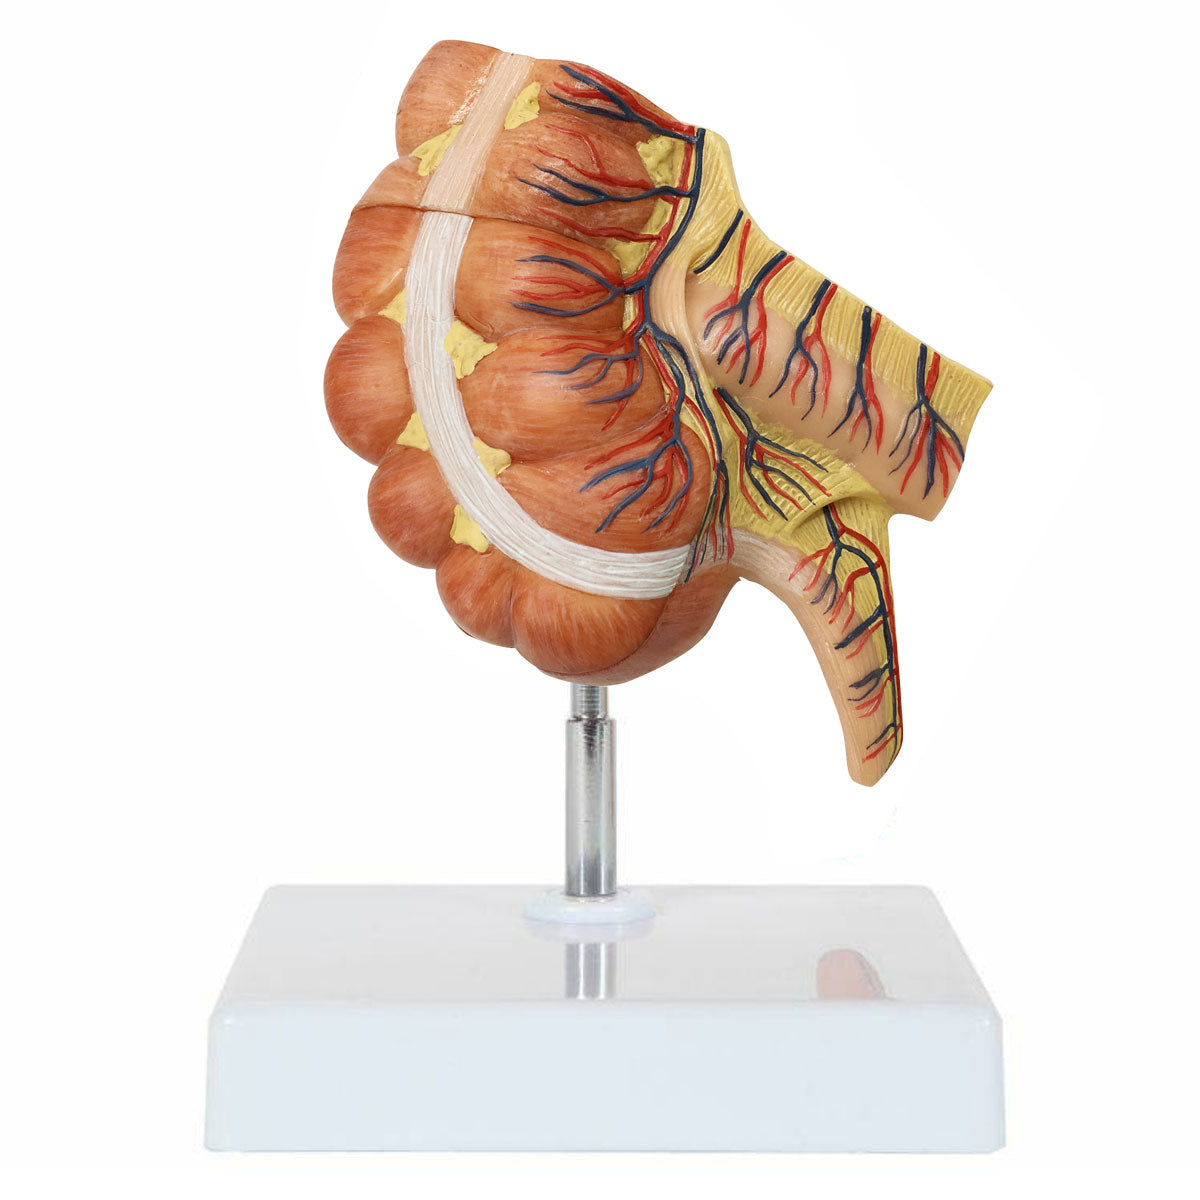 Evotech Scientific Caecum and Appendix Anatomy Model 1.5x Life-size Digestive System Anatomy Model with Appendix